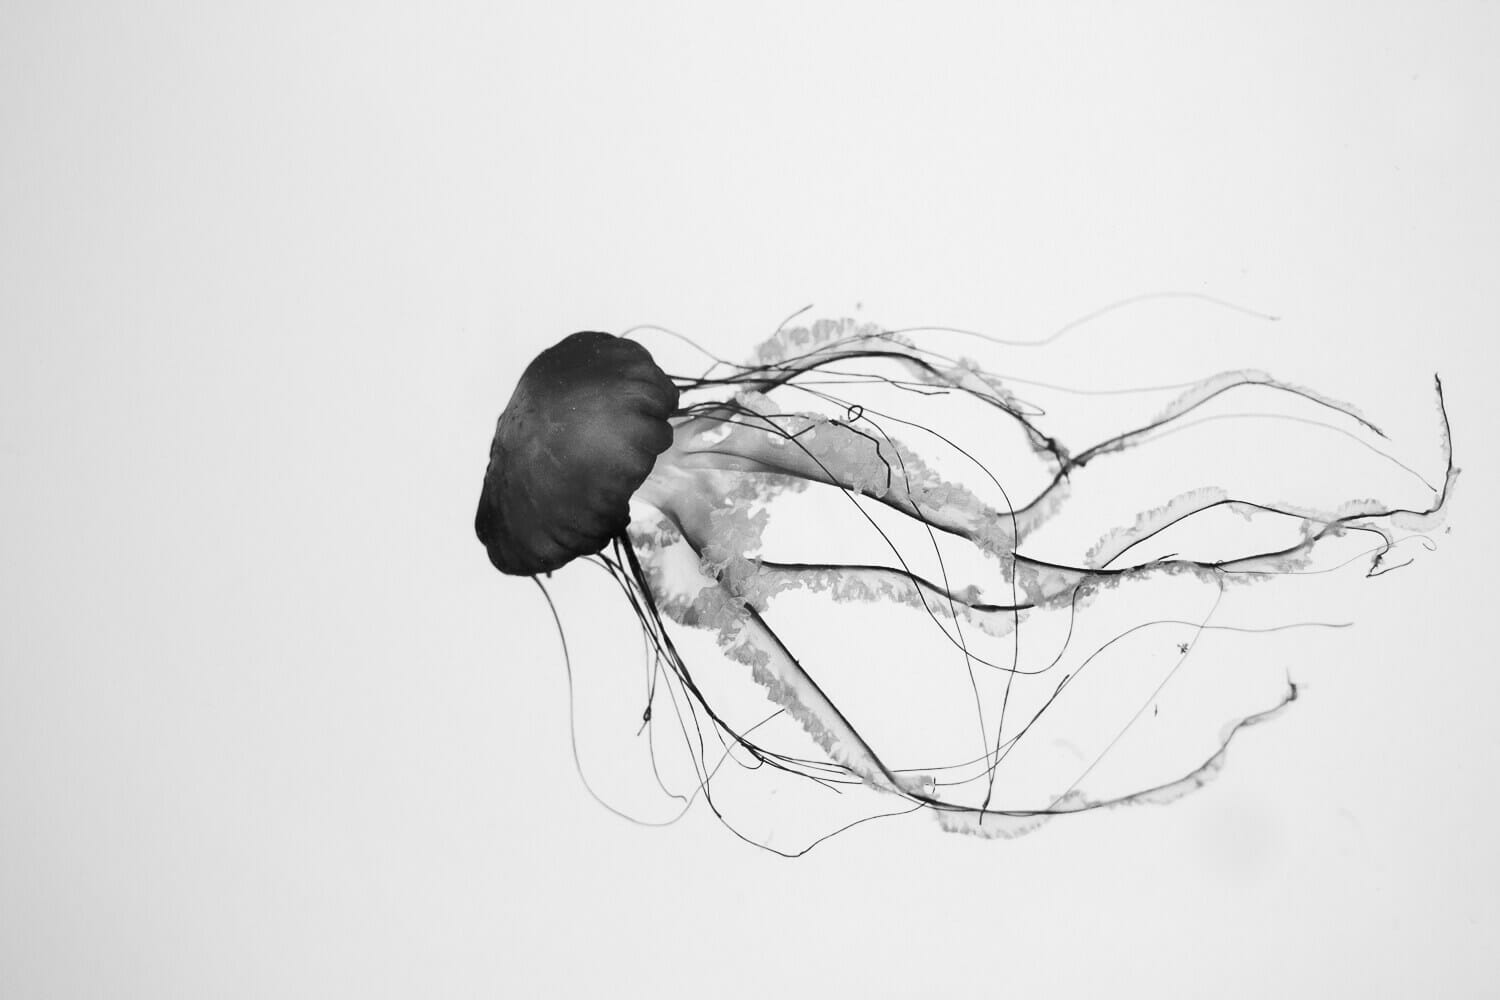 A sea nettle jellyfish floats alone on a white surface